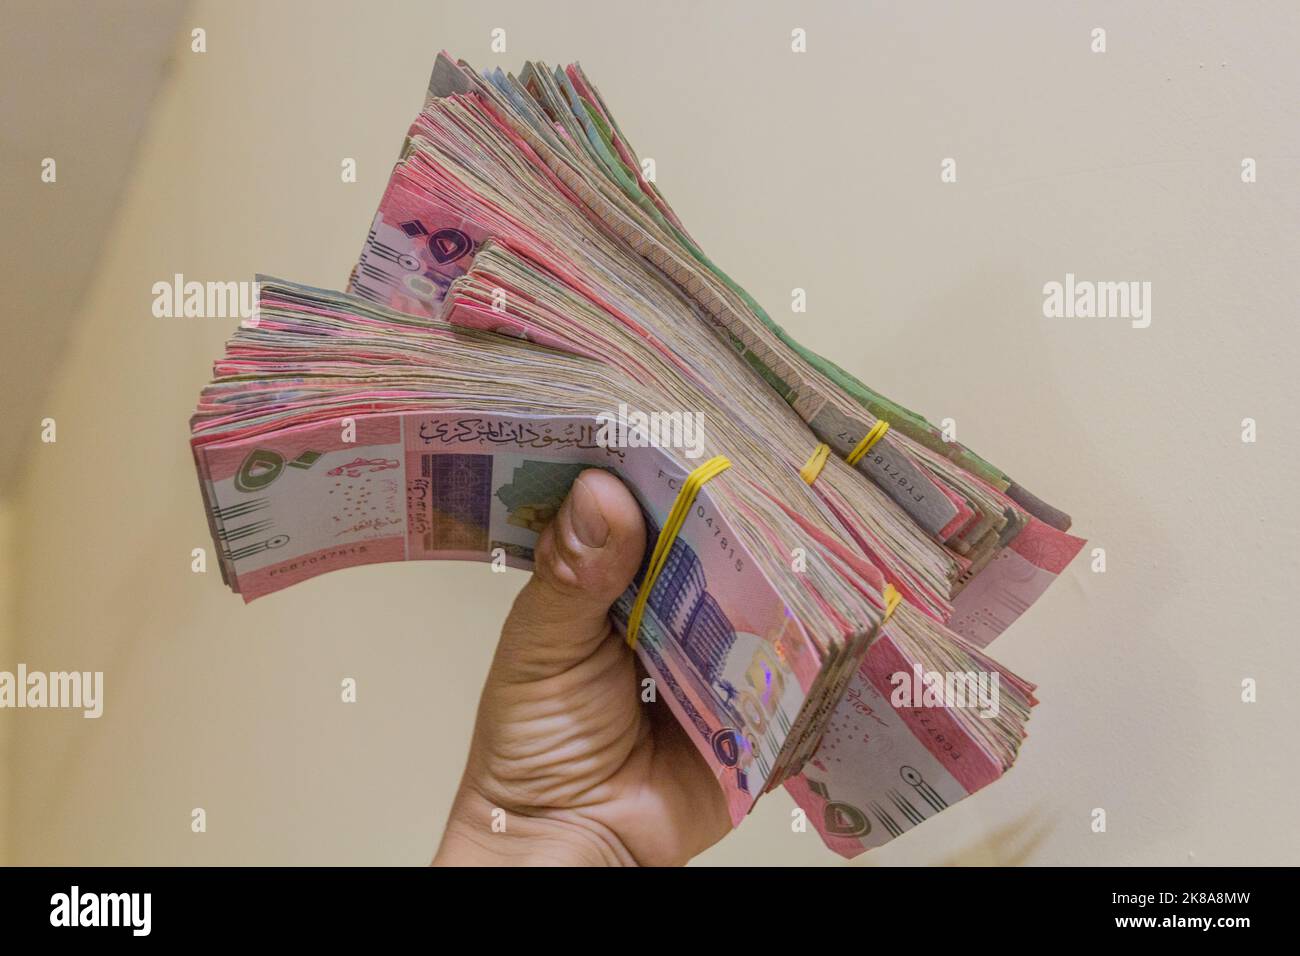 Hand holding stacks of Sudanese Pound banknotes Stock Photo